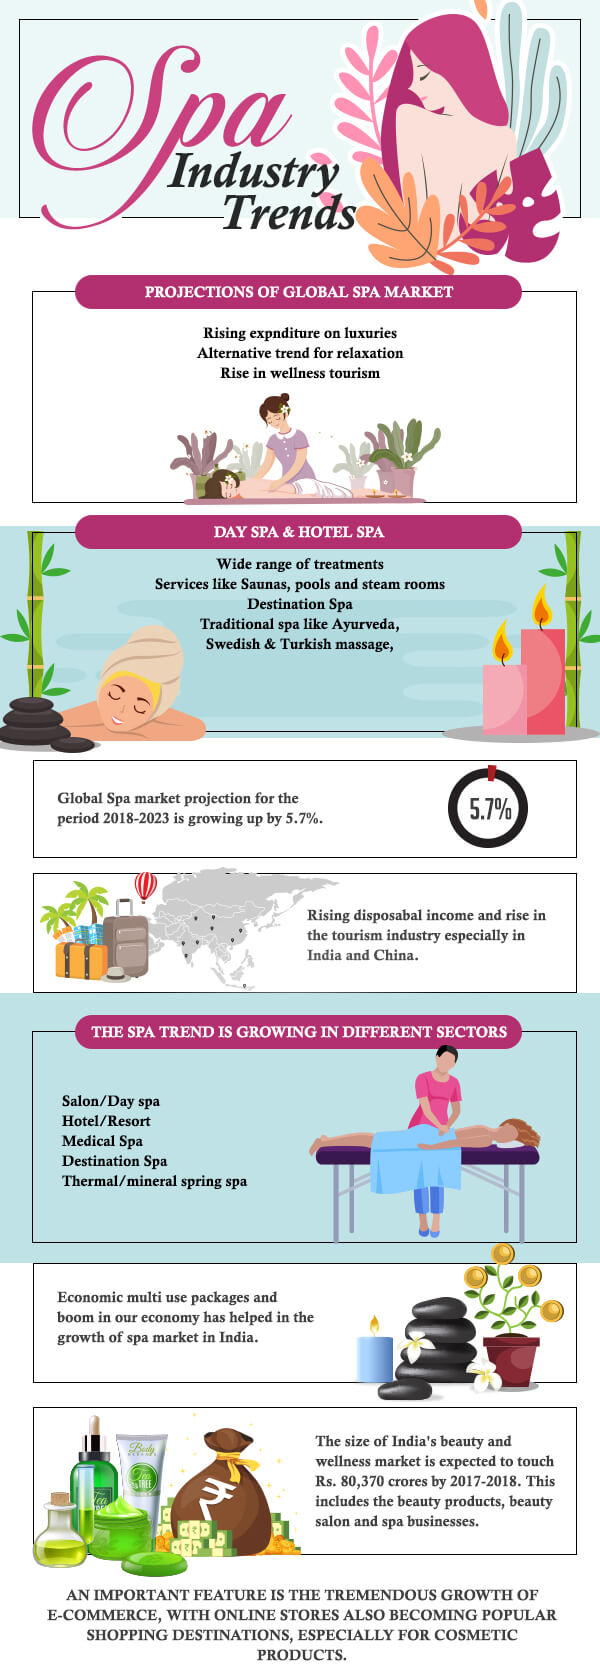 Spa-Industry-Trends